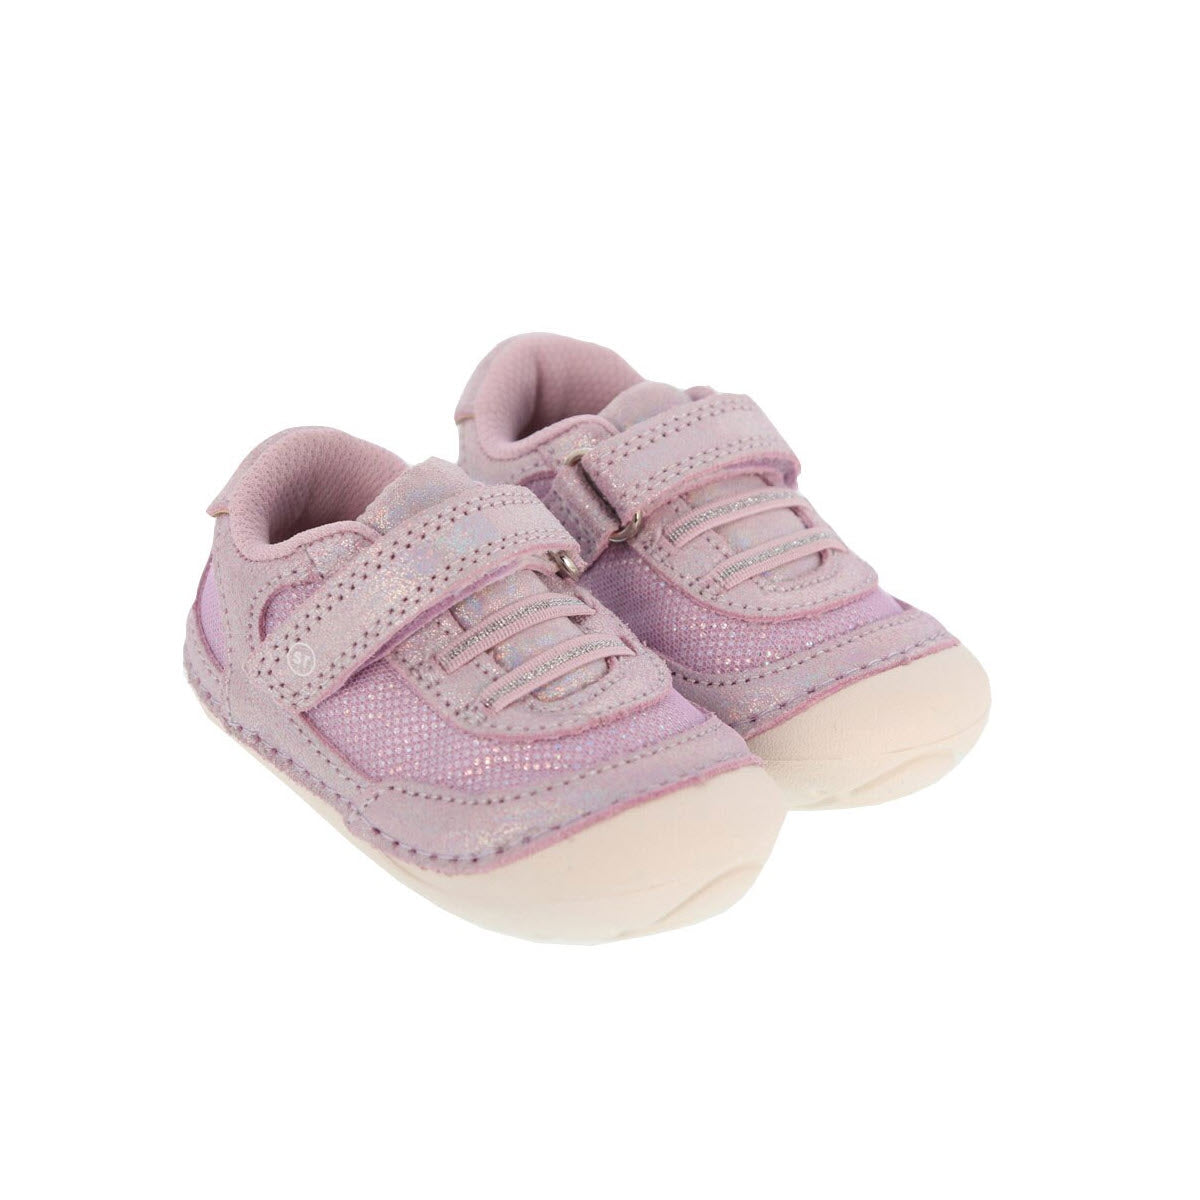 A pair of Stride Rite SM Jazzy Purple Multi - Kids toddler shoes with metallic velcro fasteners and white soles, isolated on a white background.